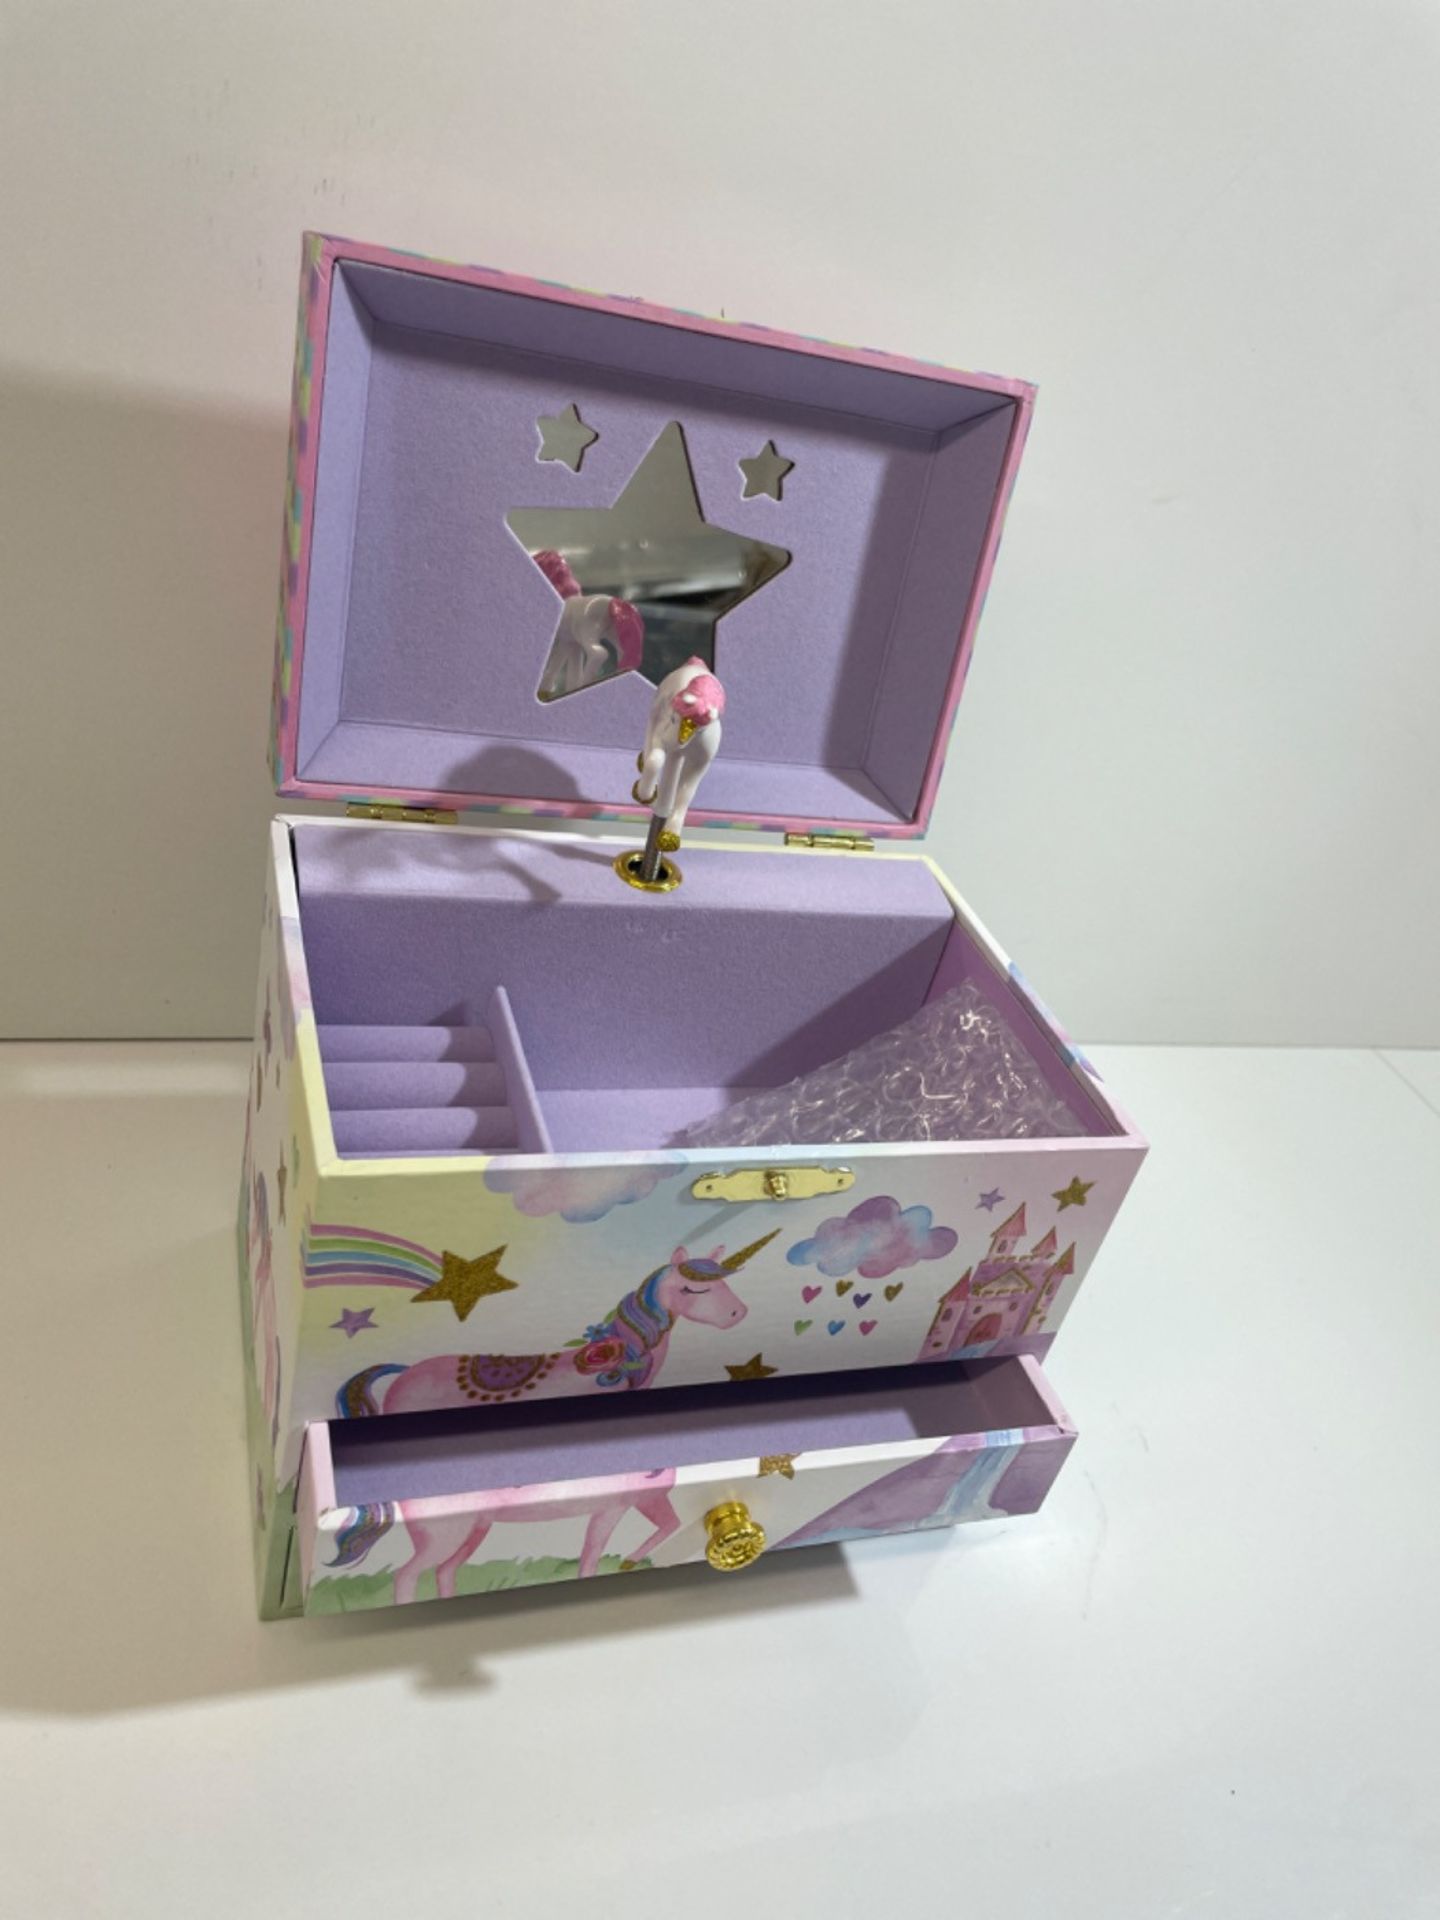 Jewelkeeper Unicorn Jewellery Box for Girls with 2 Pull-out Drawers, Glitter Rainbow and Stars Unic - Image 3 of 3